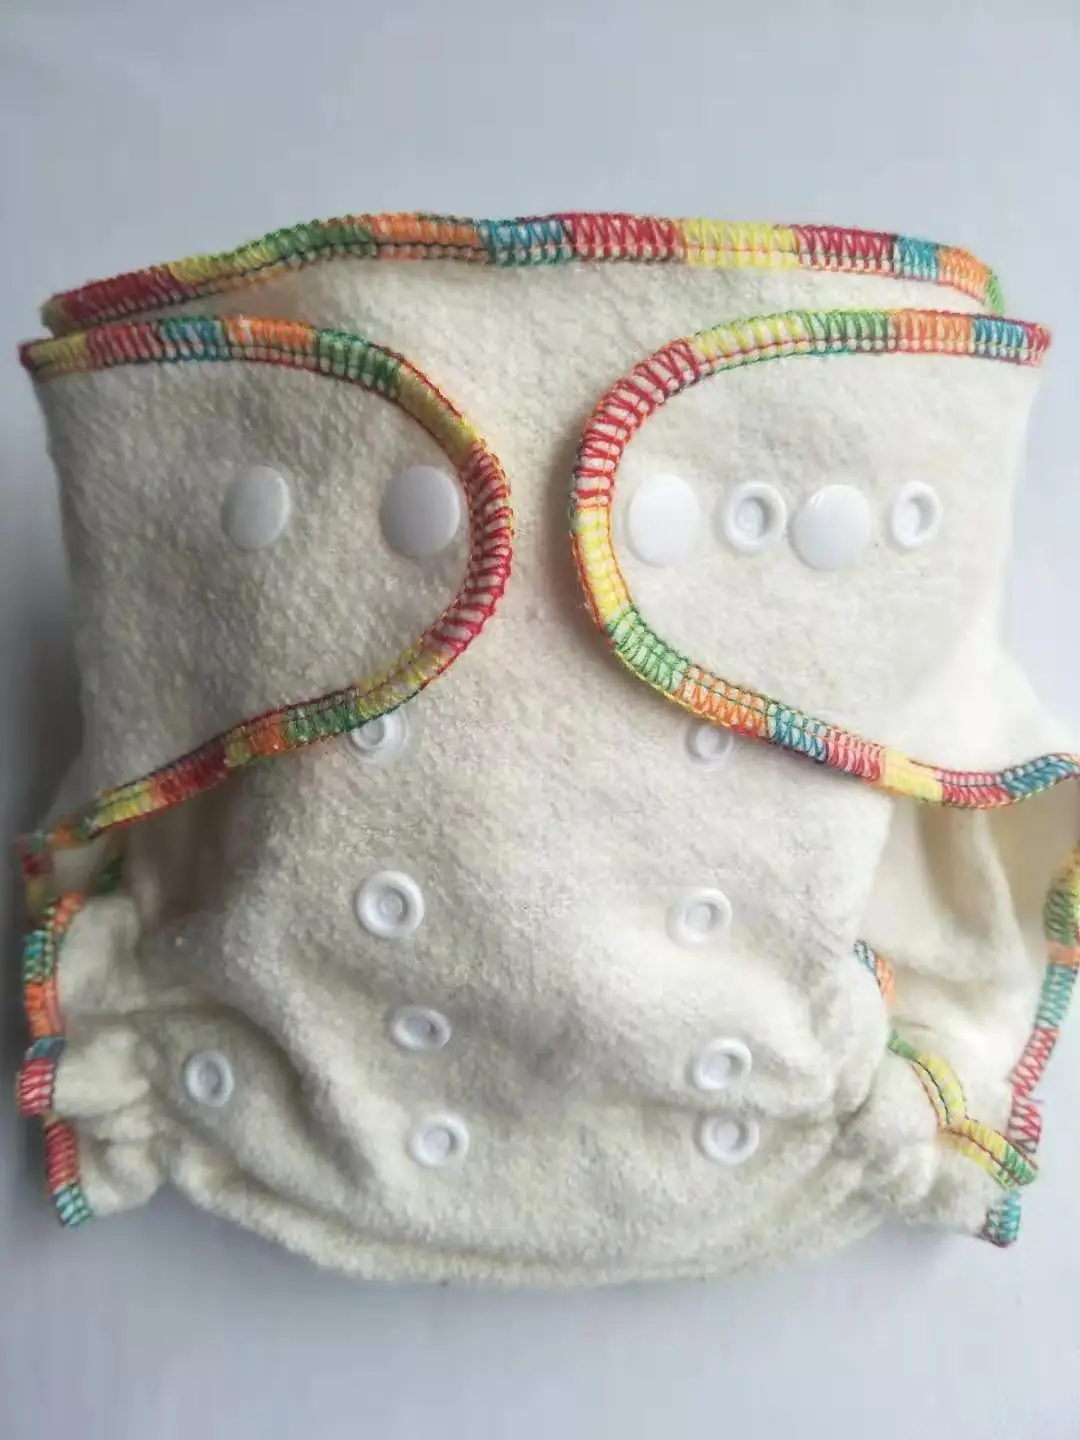 Hemp/Organic Cotton Fitted Cloth Diaper Nappies With TWO Inserts baby diapers washable reusable nappies